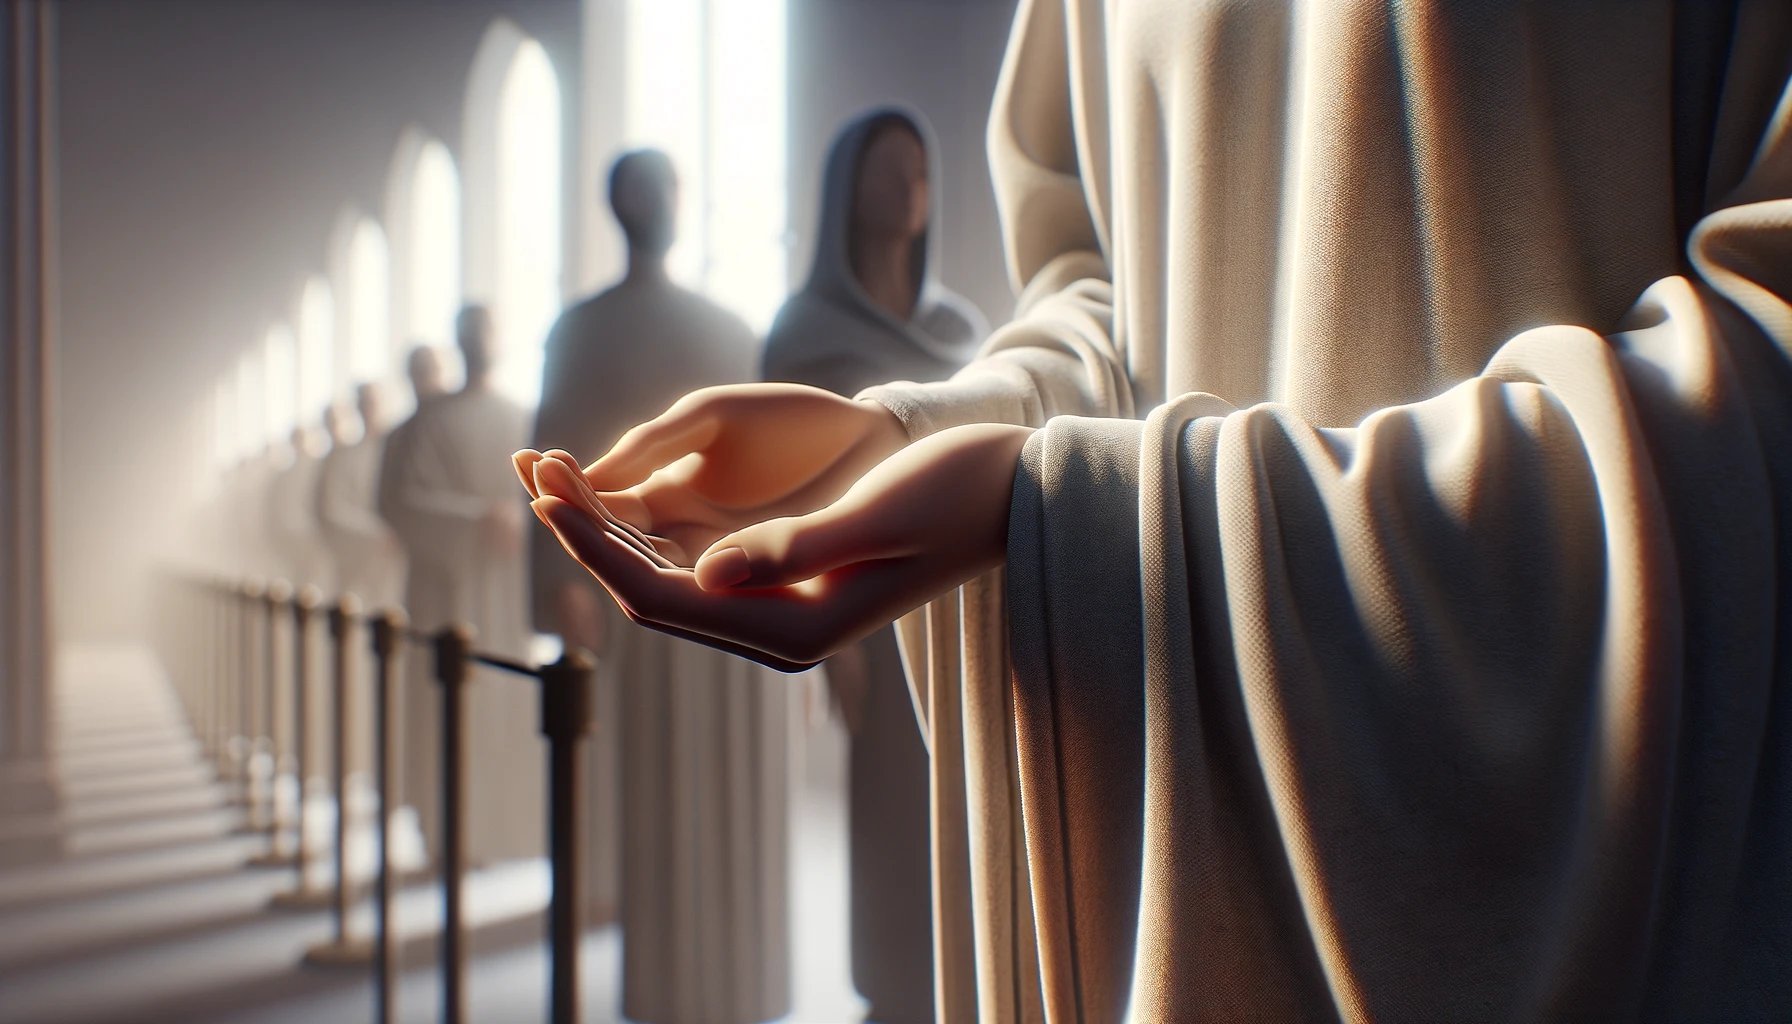 How To Receive Communion In The Hand